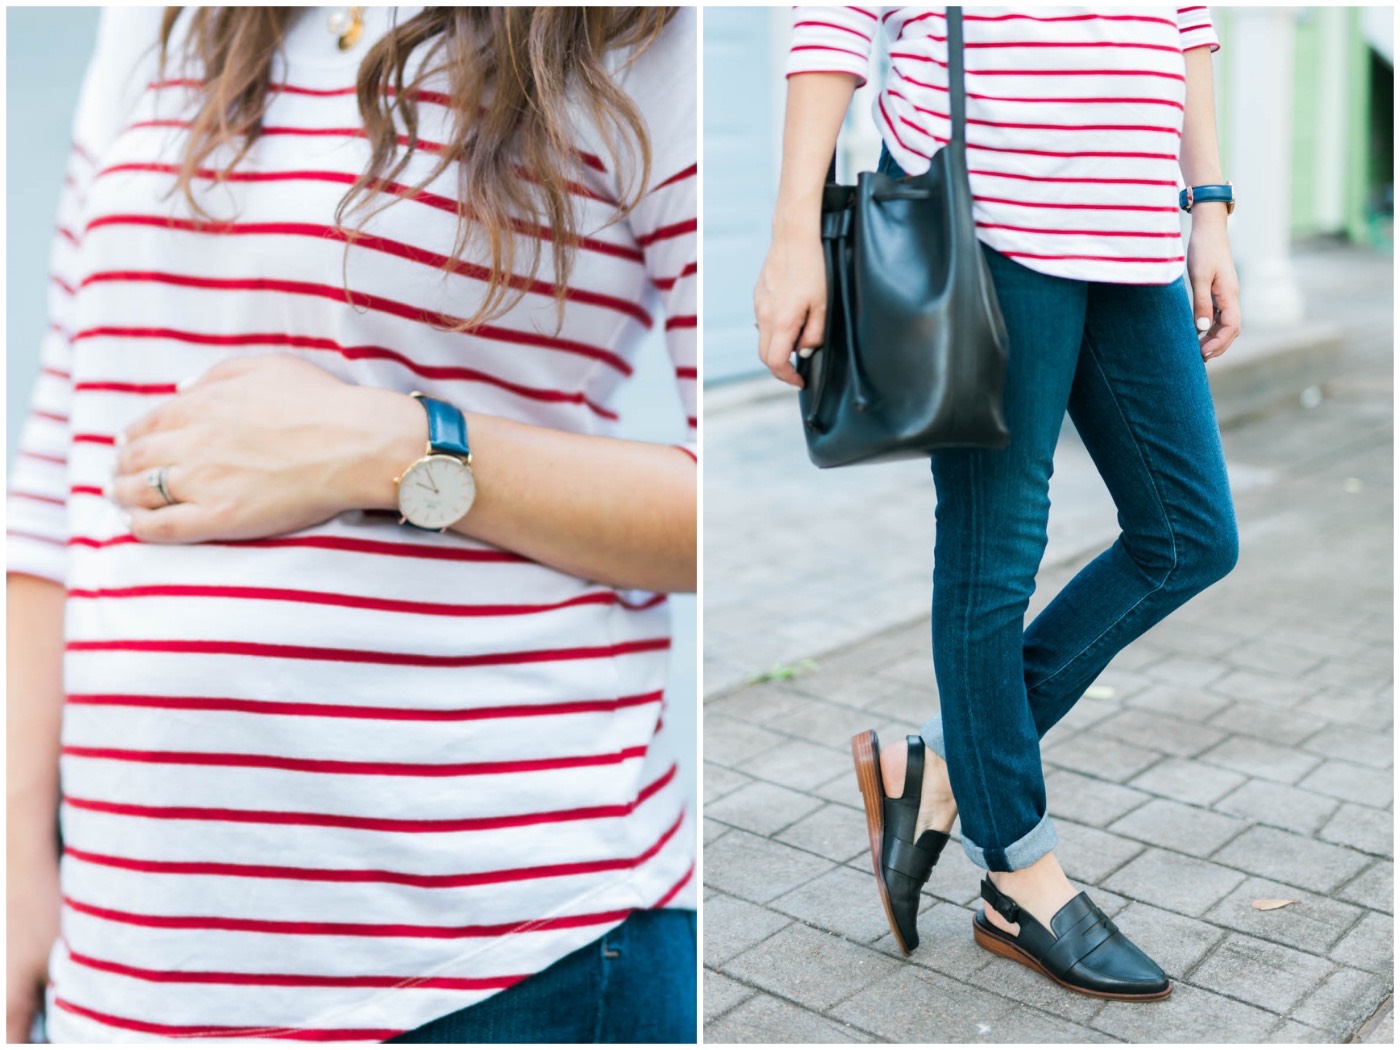 Casual maternity outfit inspiration for fall.